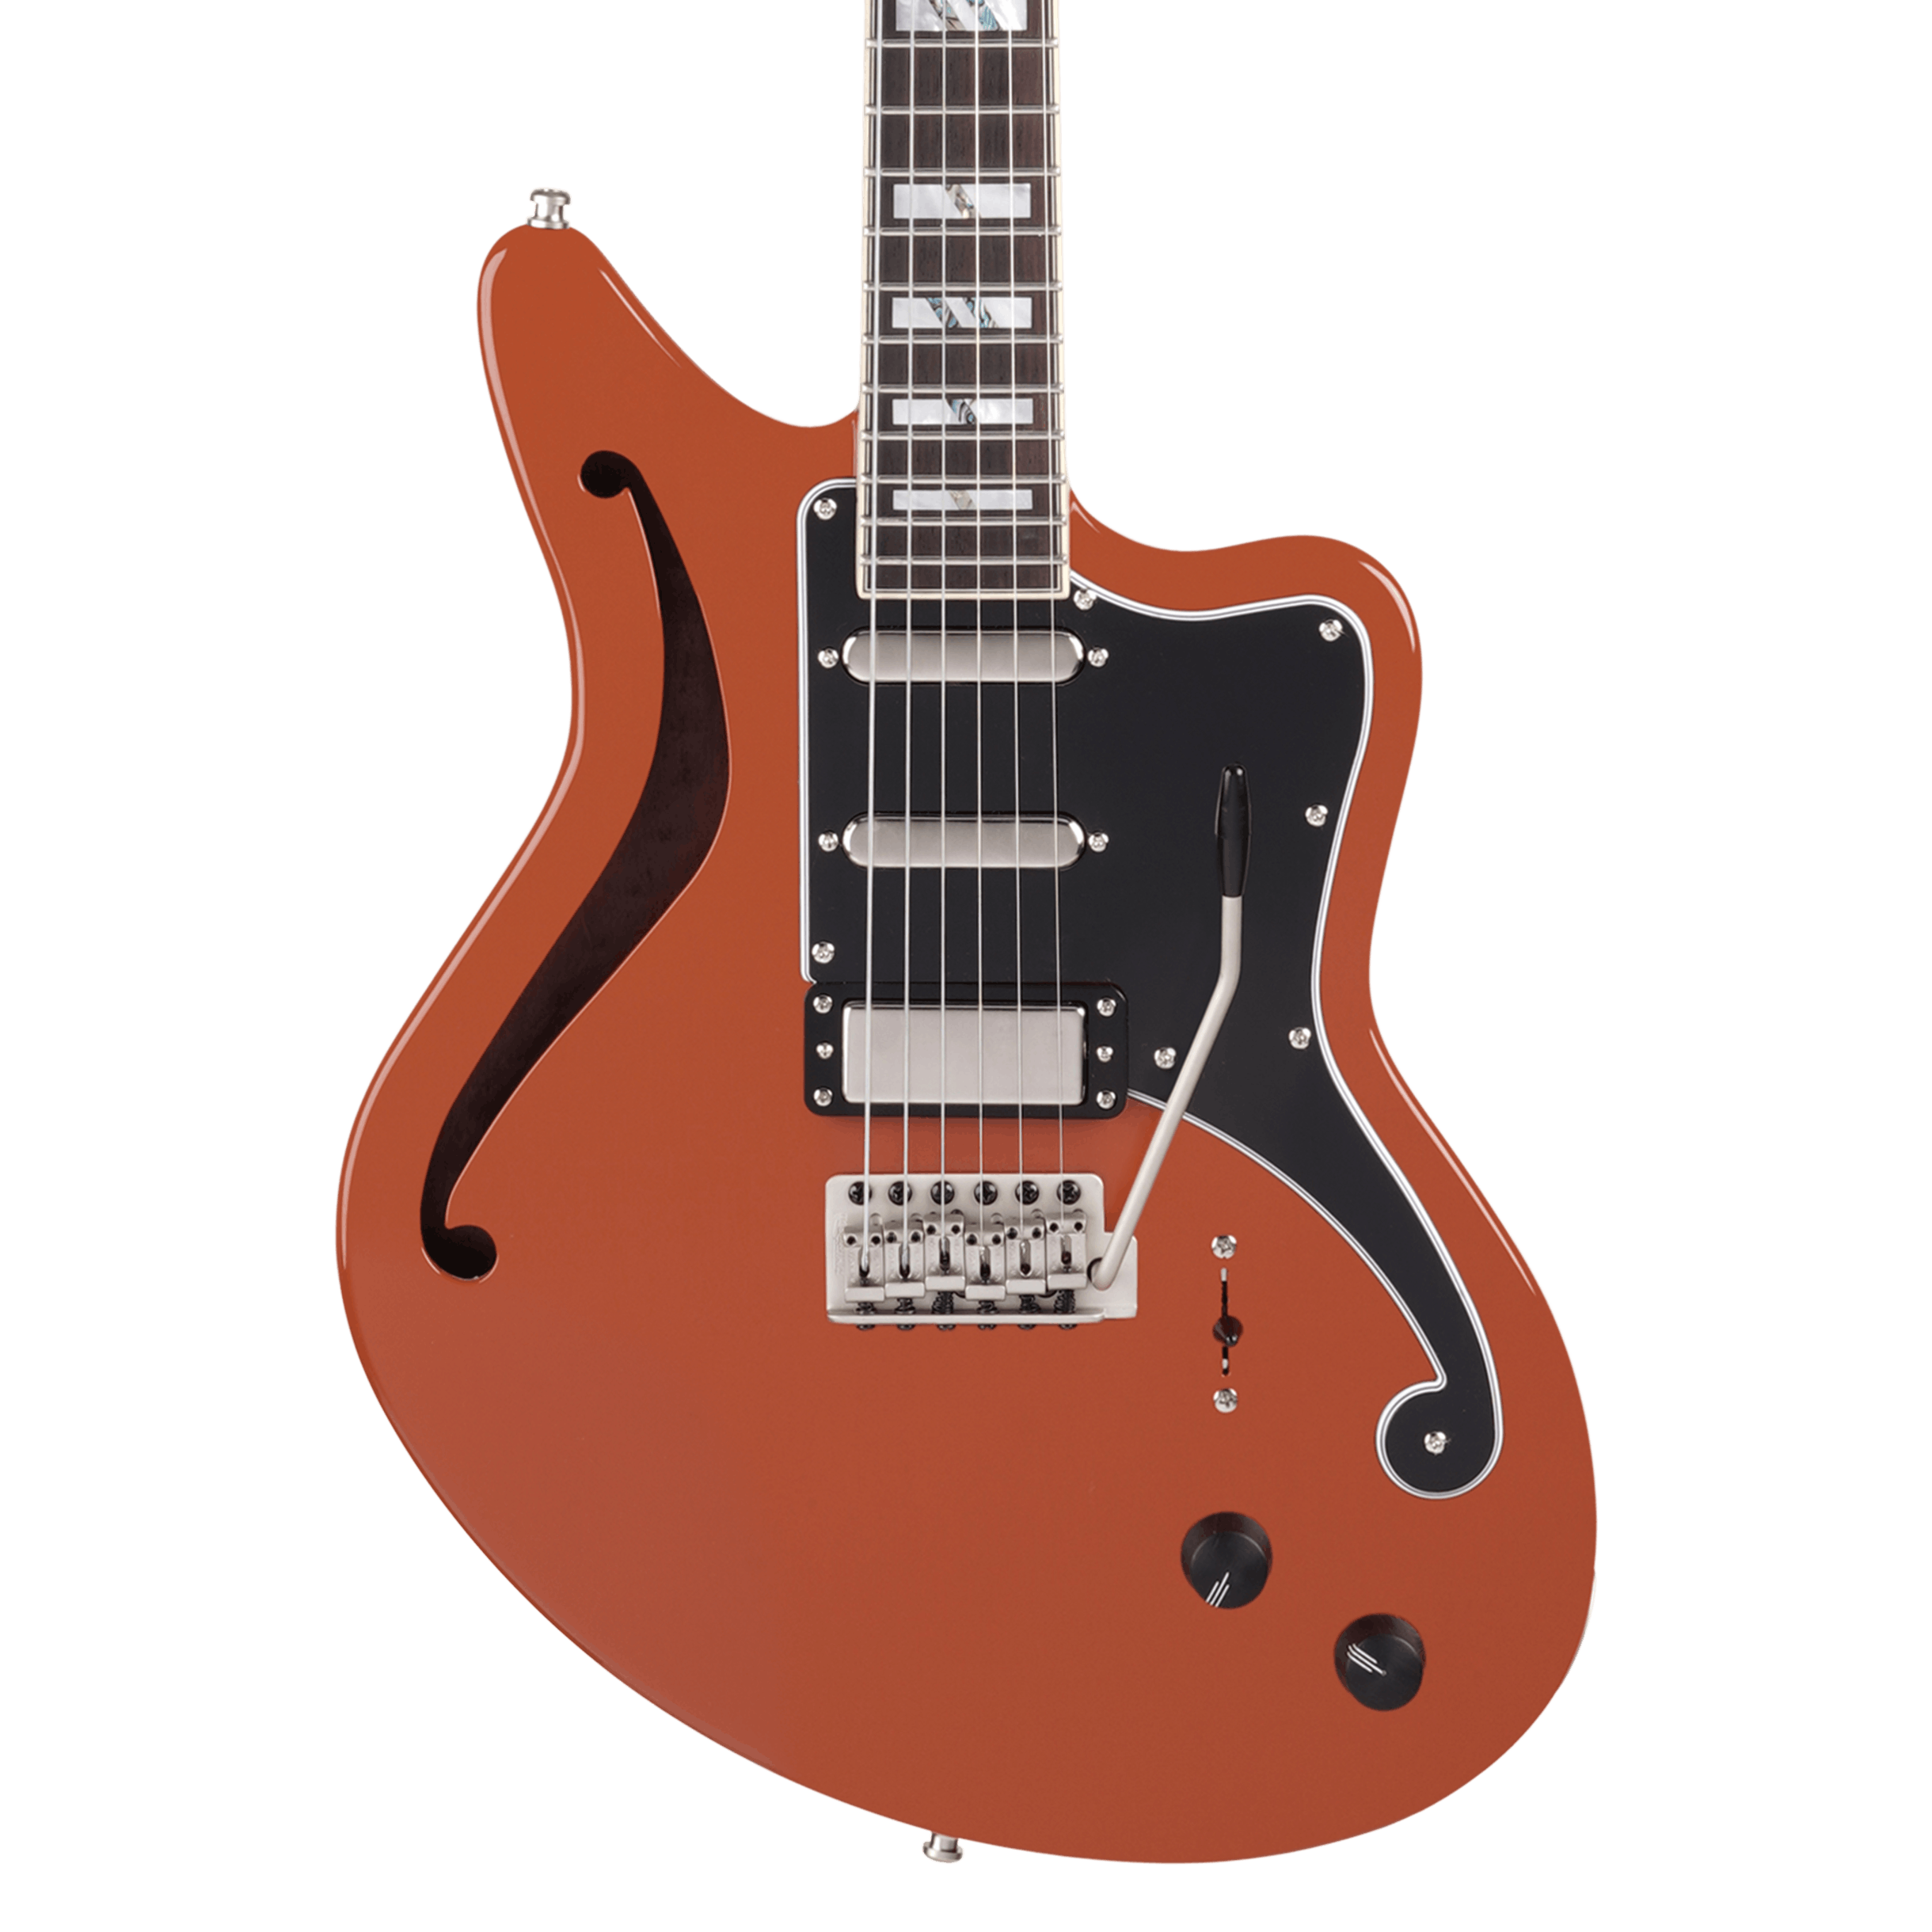 D'Angelico Deluxe Bedford SH LE Semi-Hollow Electric Guitar in 